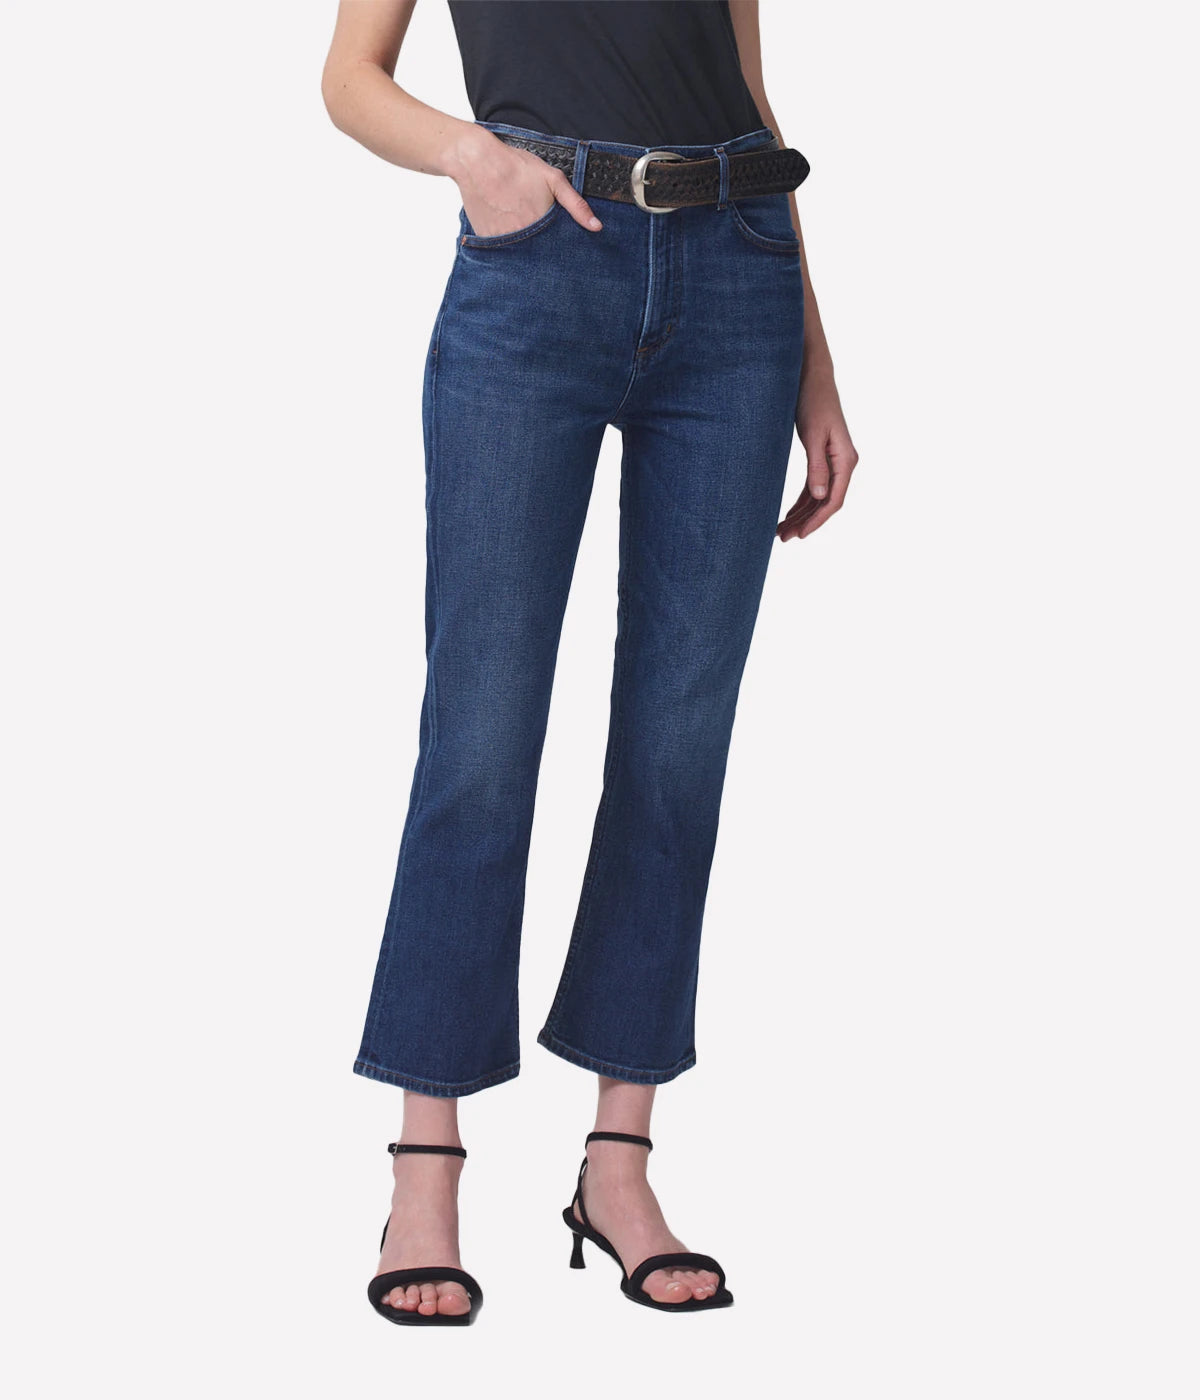 Isla Cropped Boot Jean in Provance